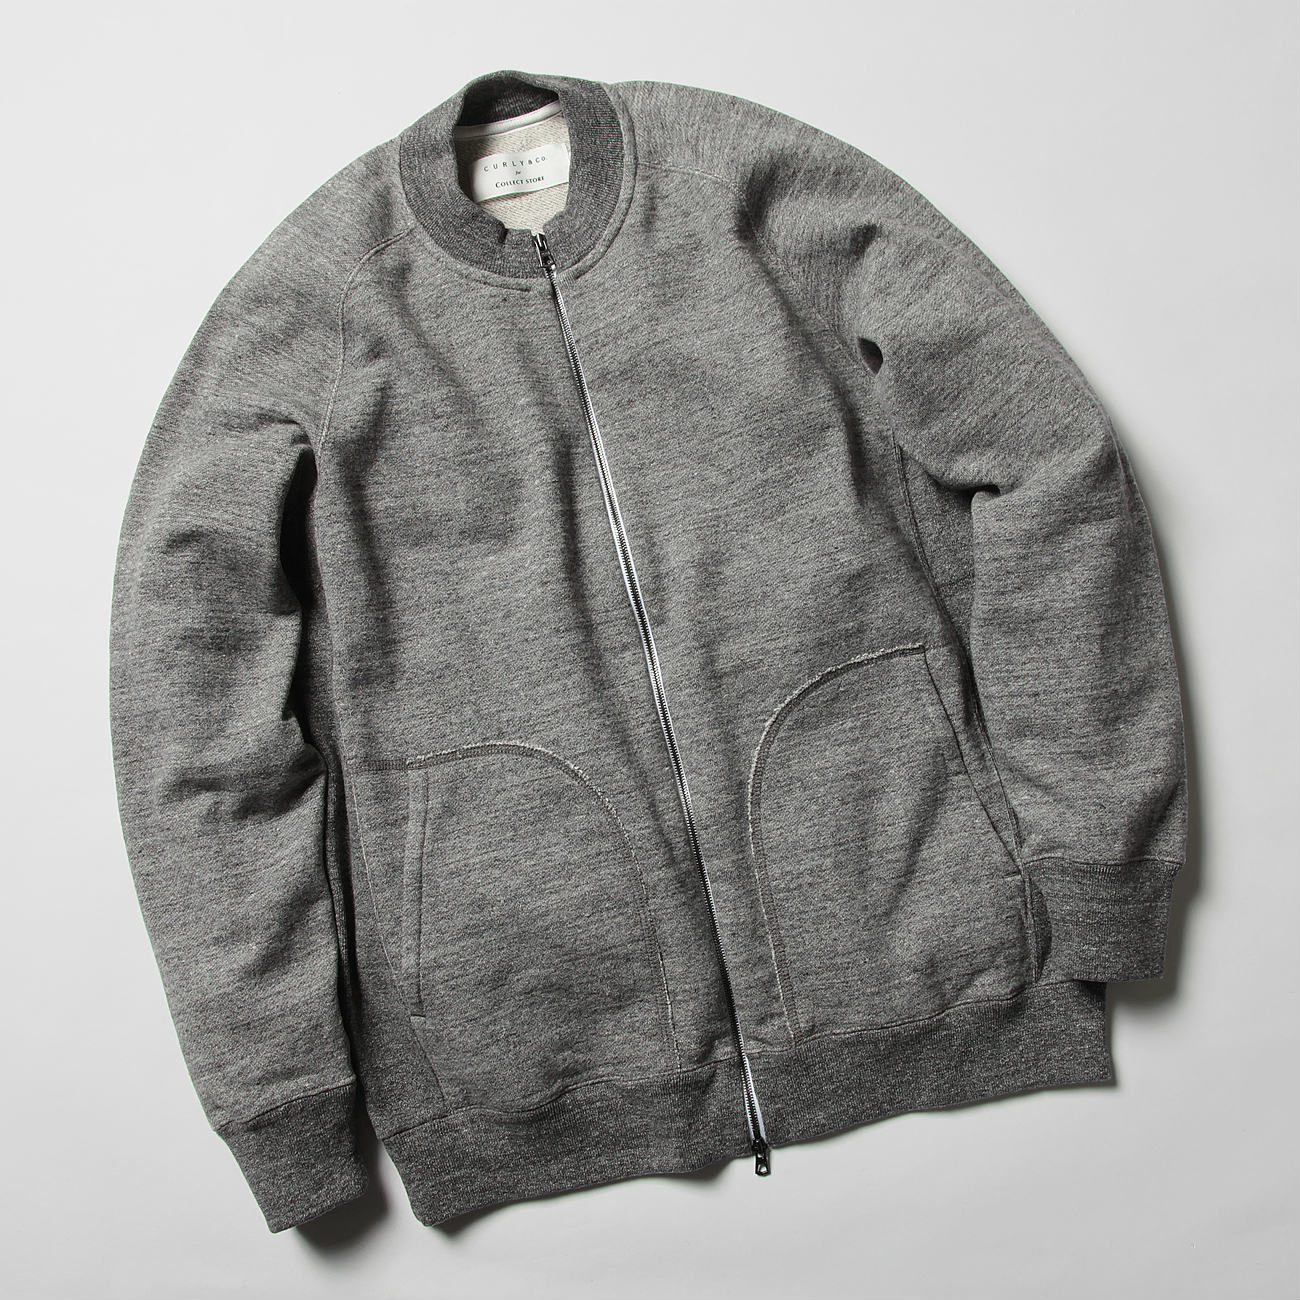 CURLY / カーリー | RAFFY ZIP CREW exclusively at COLLECT STORE - Charcoal | 通販  - 正規取扱店 | COLLECT STORE / コレクトストア